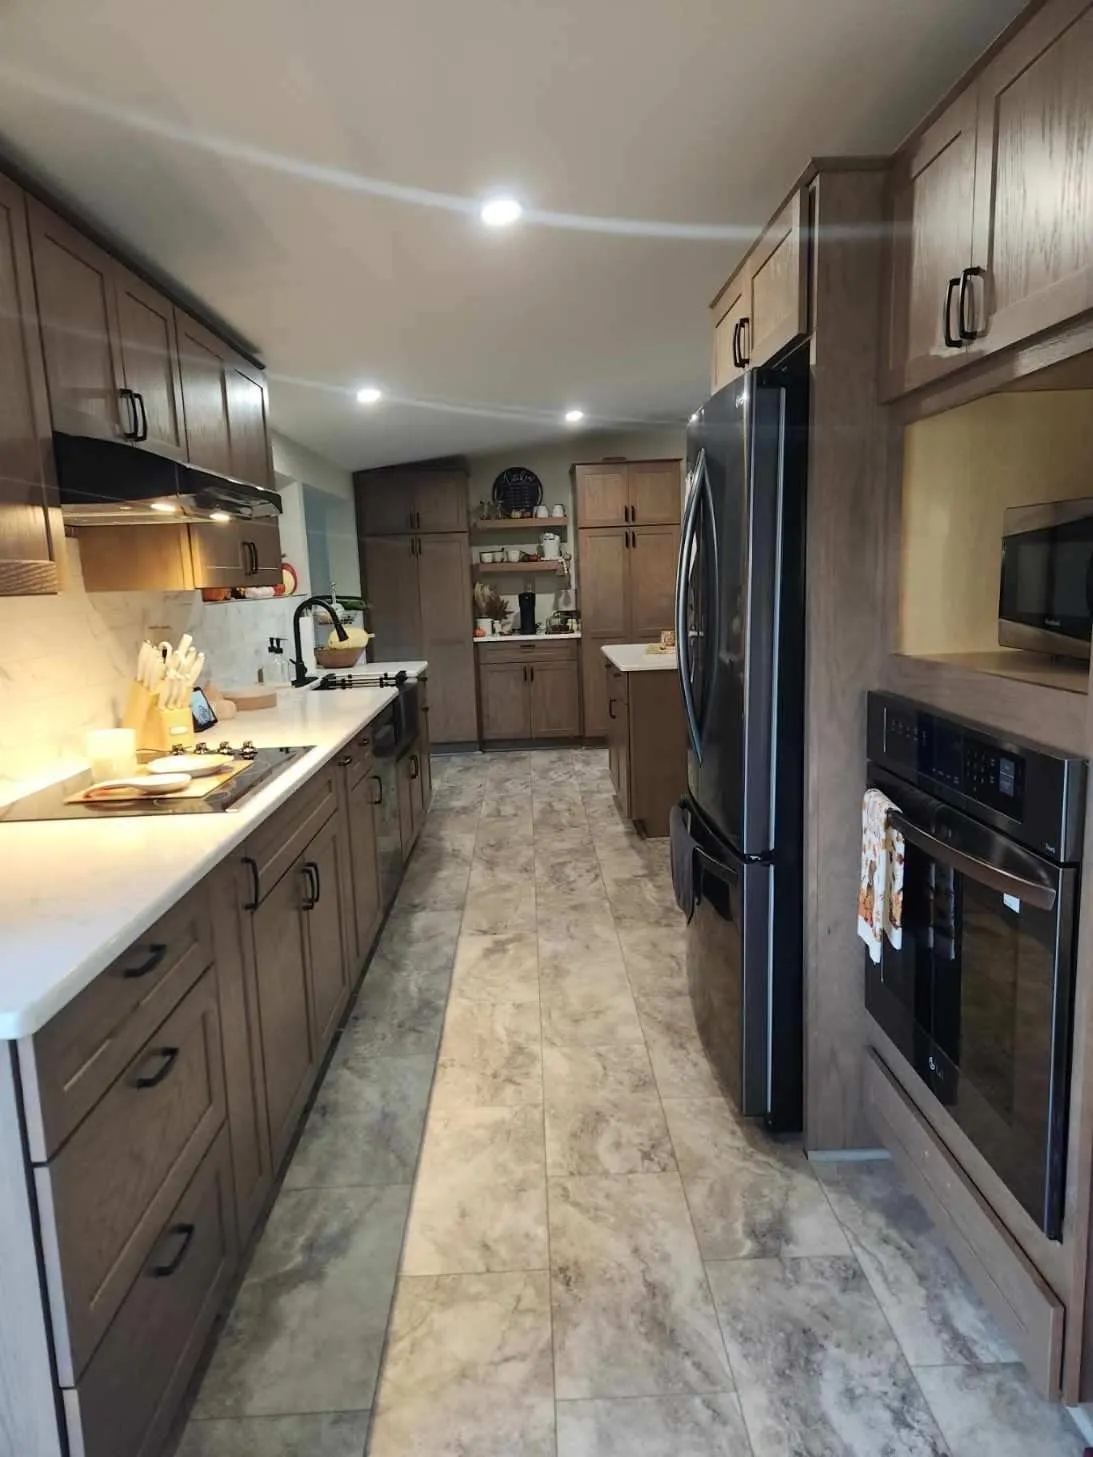 A kitchen in a mobile home with a stove and refrigerator.